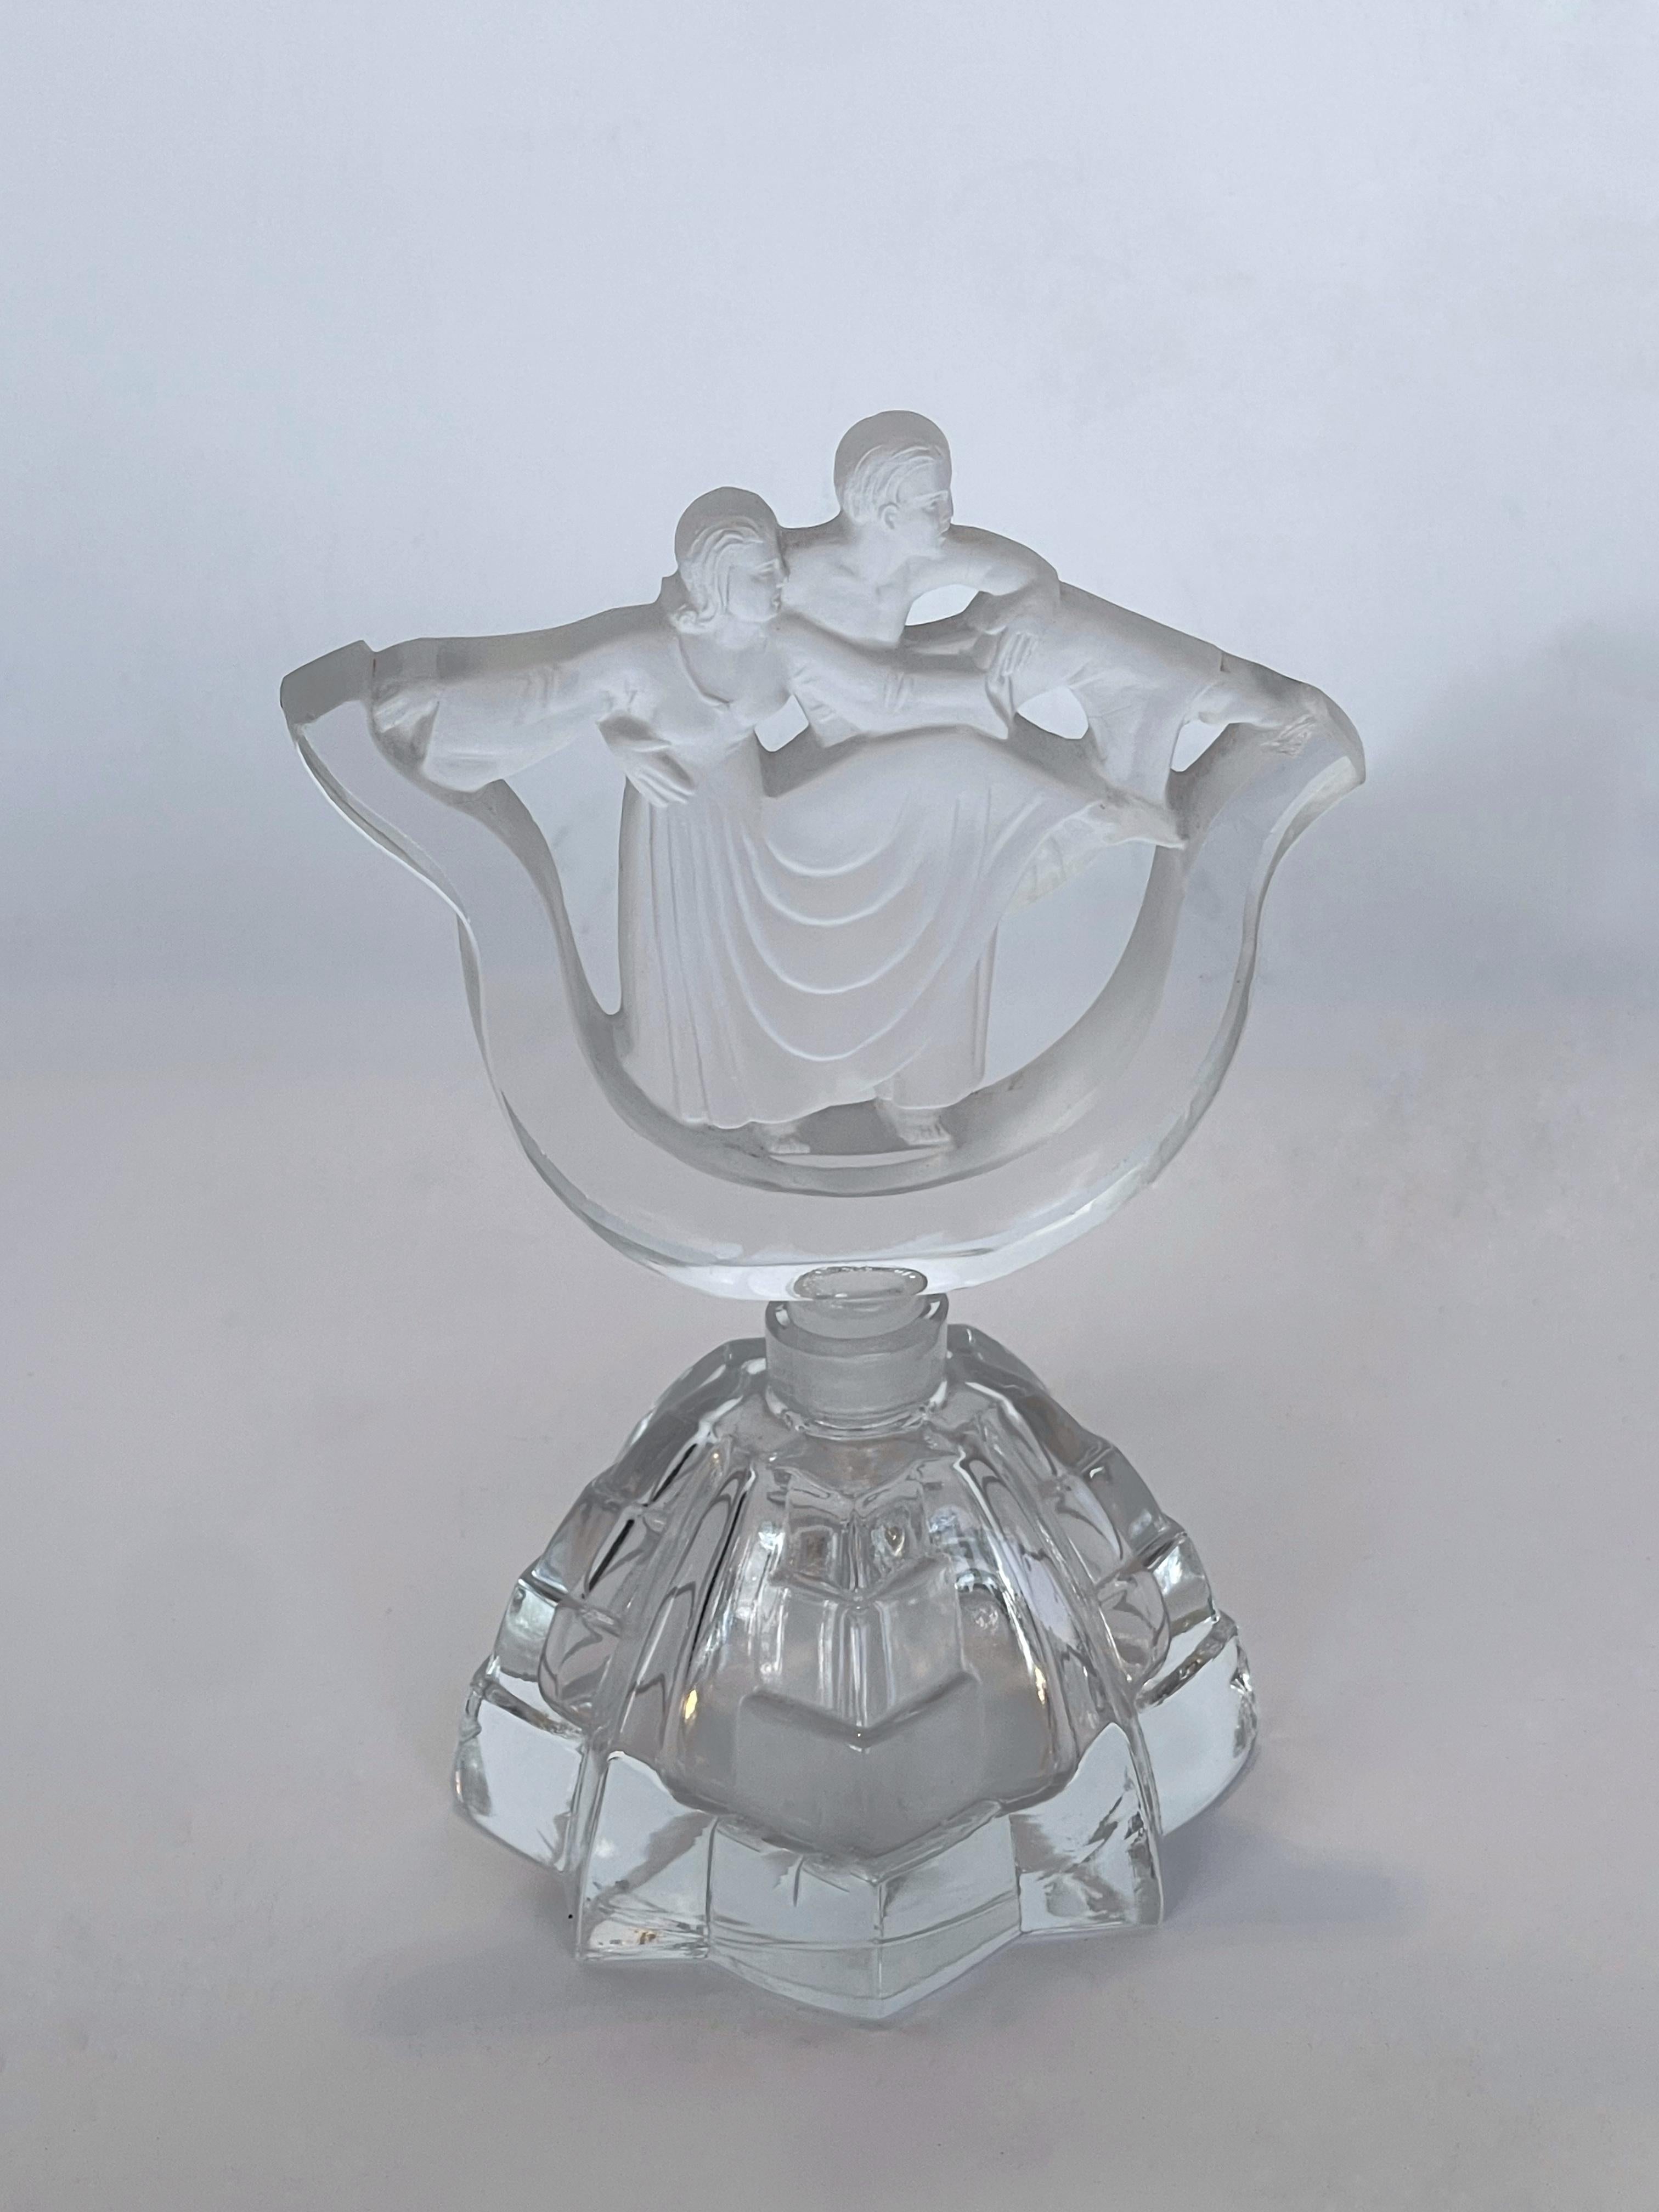 Collection of assorted designer perfume bottles, lalique and Murano bottles, French, and Italian.

IMPORTANT NOTICE: The listing appears to have 11 items in the set but there is 10. (1stDibs doesn't allow edits for this).